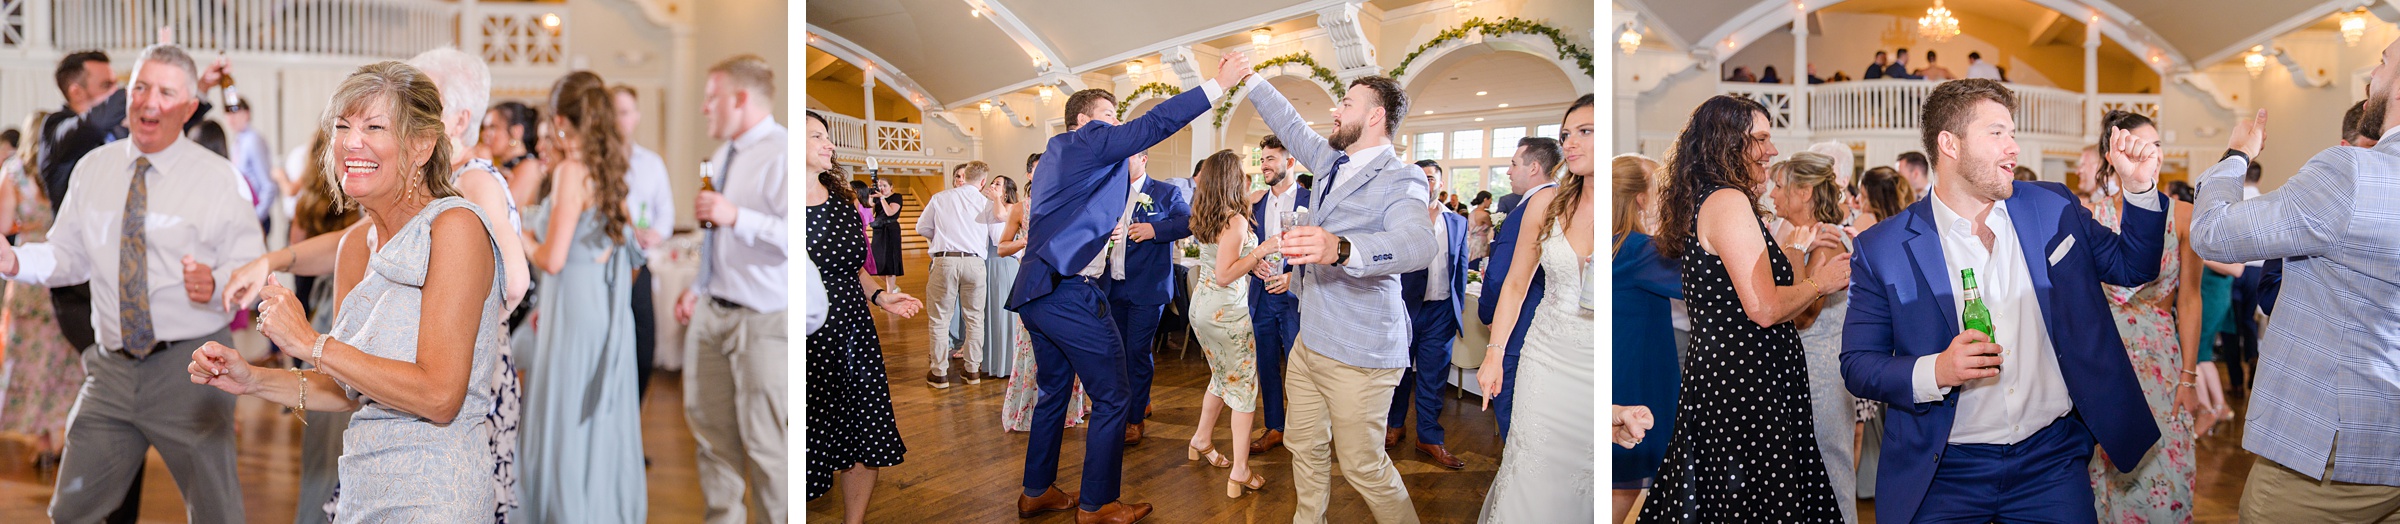 Silver Sage and Navy Summer wedding day at the Philadelphia Cricket Club Photographed by Baltimore Wedding Photographer Cait Kramer Photography